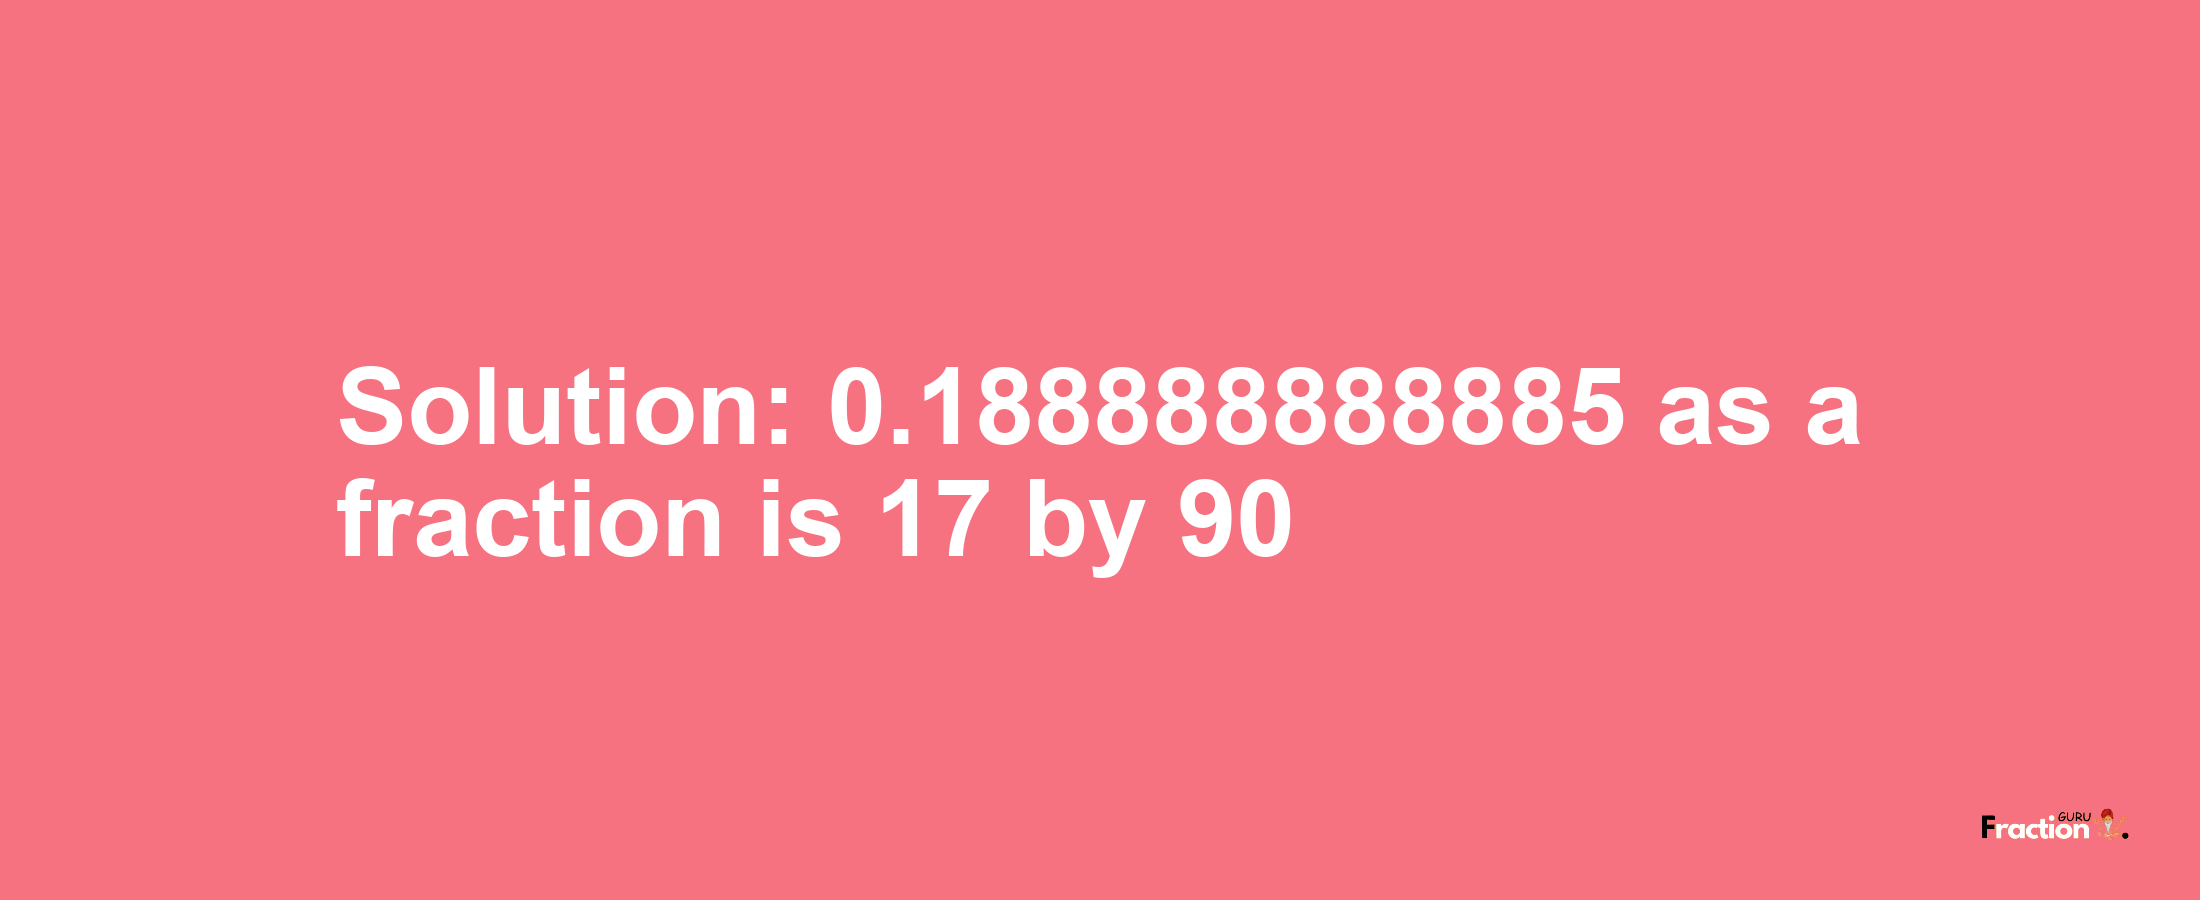 Solution:0.188888888885 as a fraction is 17/90